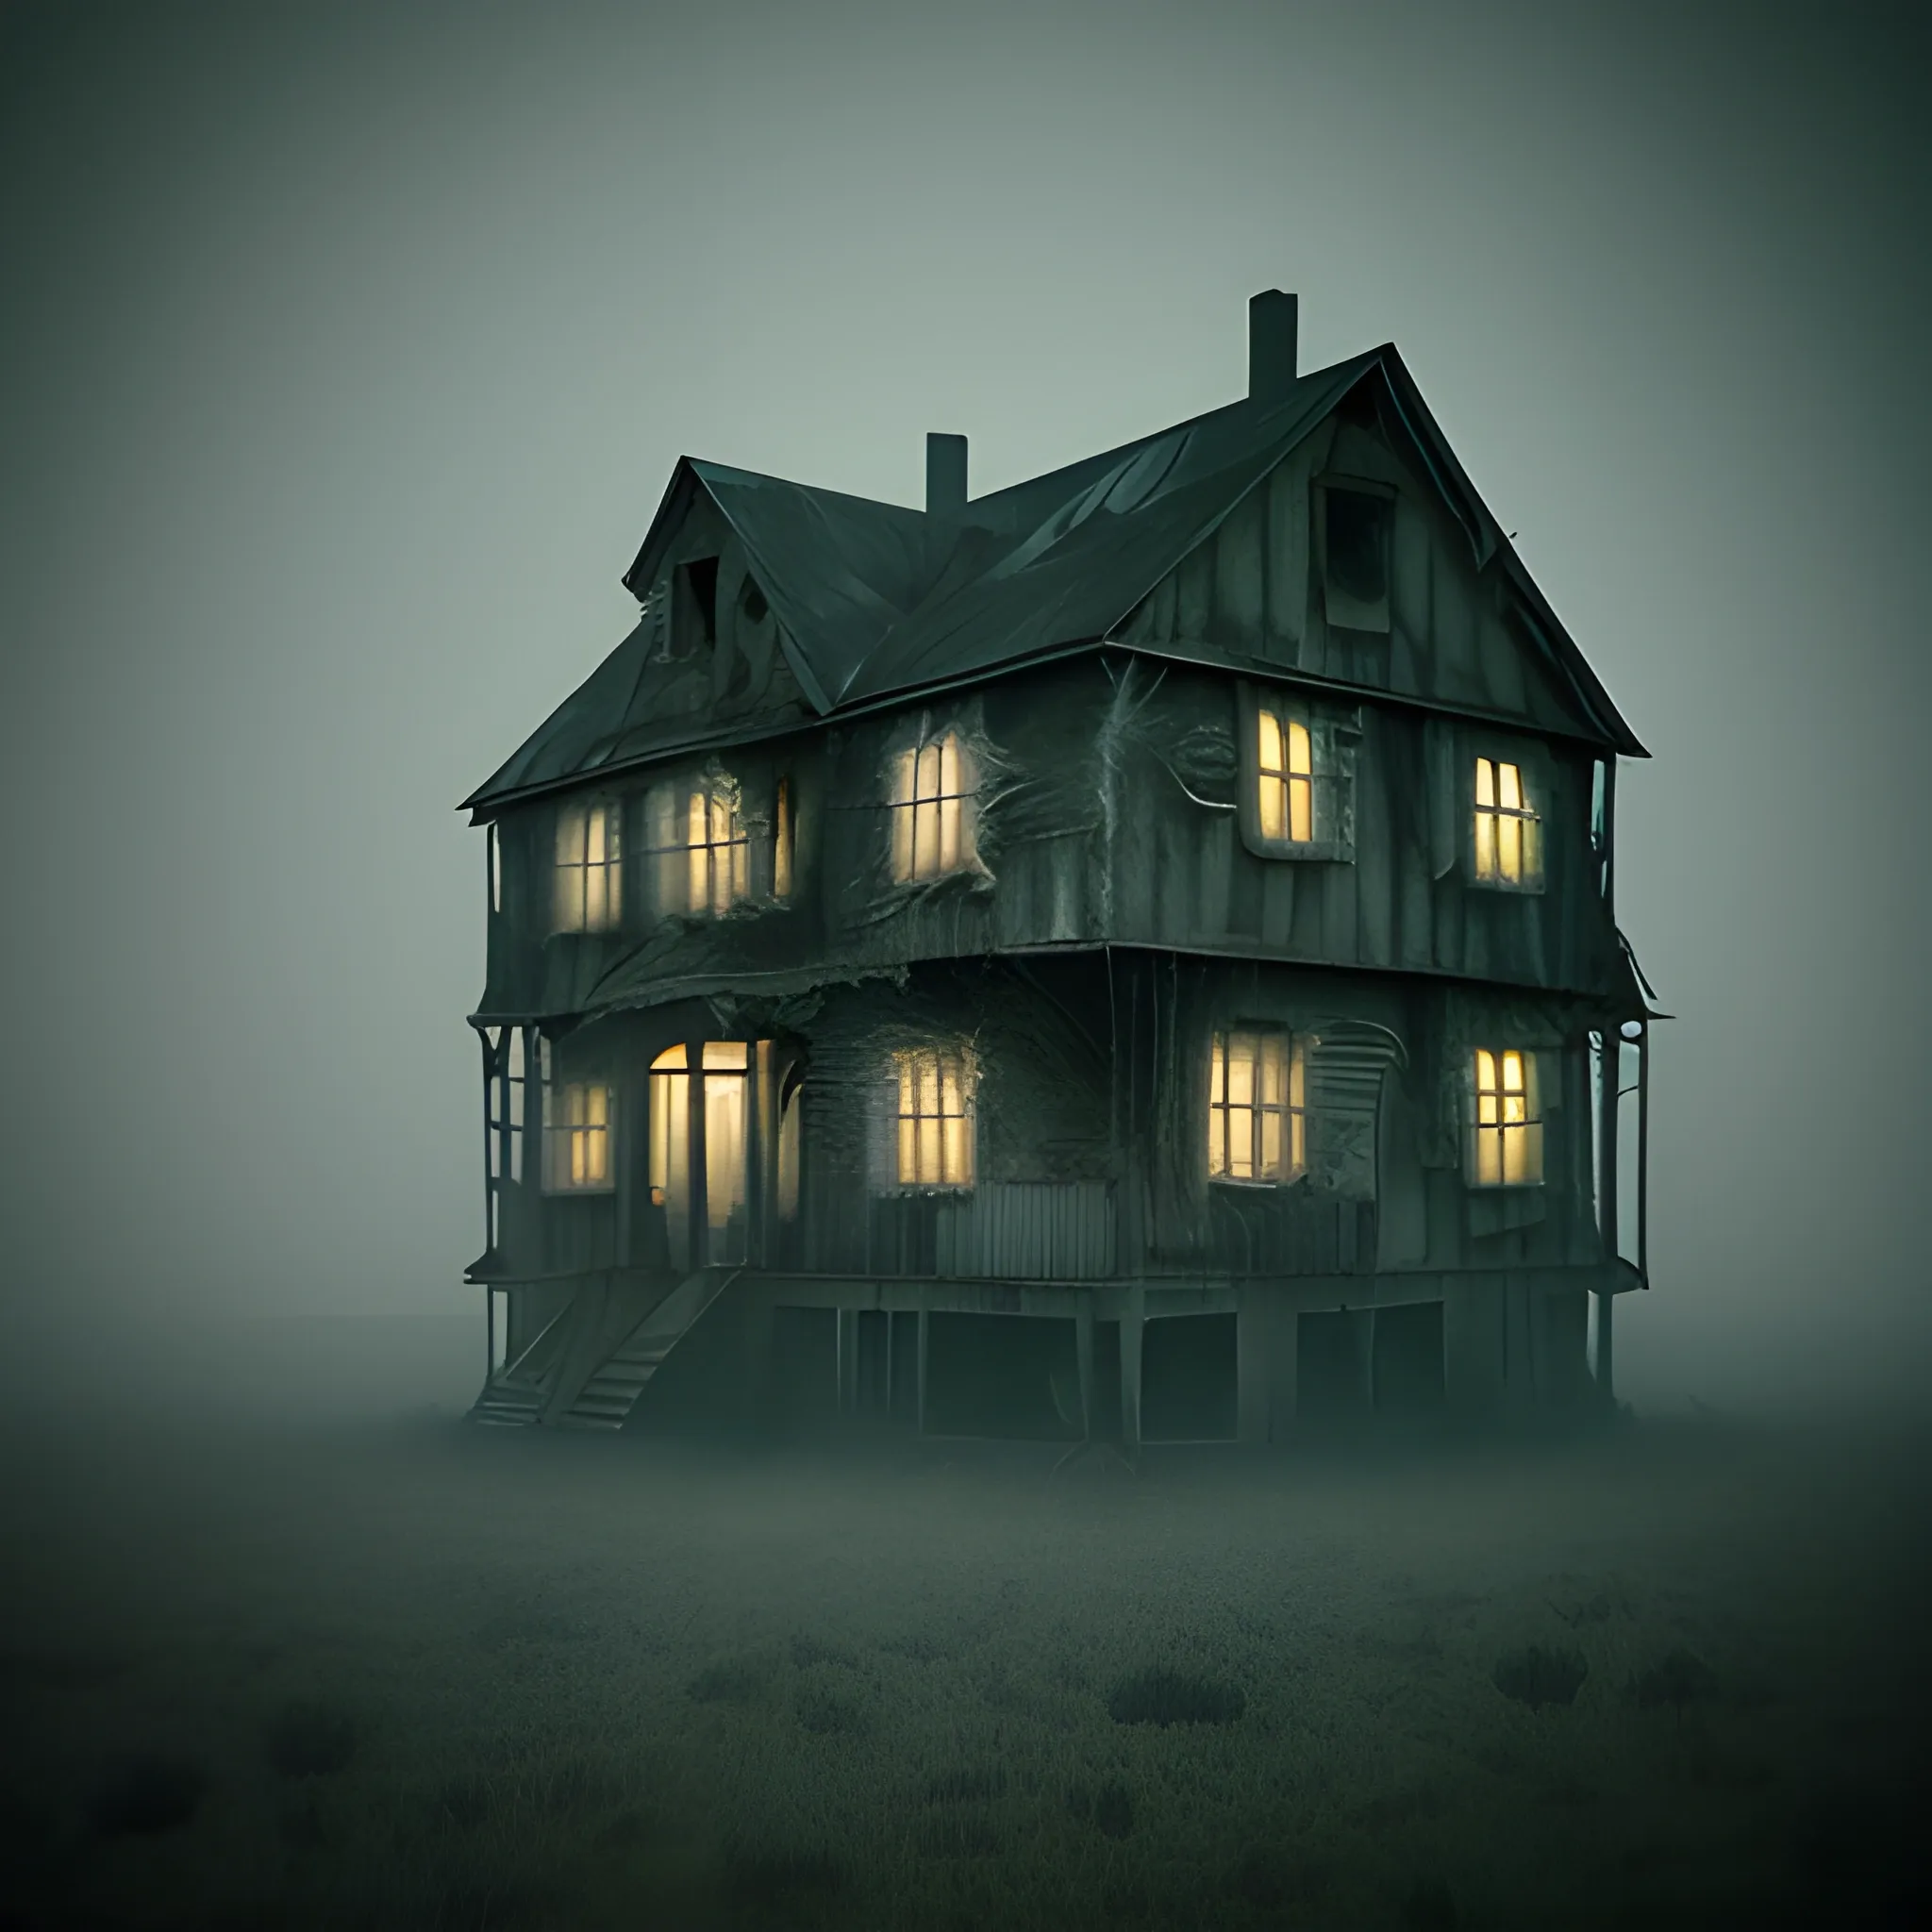 "An old, dilapidated house on a cold and rainy night, with a dark, ominous aura."
"A haunted house at the outskirts of town, surrounded by fog and tall, dead trees."
ugly, 

deformed, 

noisy, 

blurry, 

distorted, 




, 3D